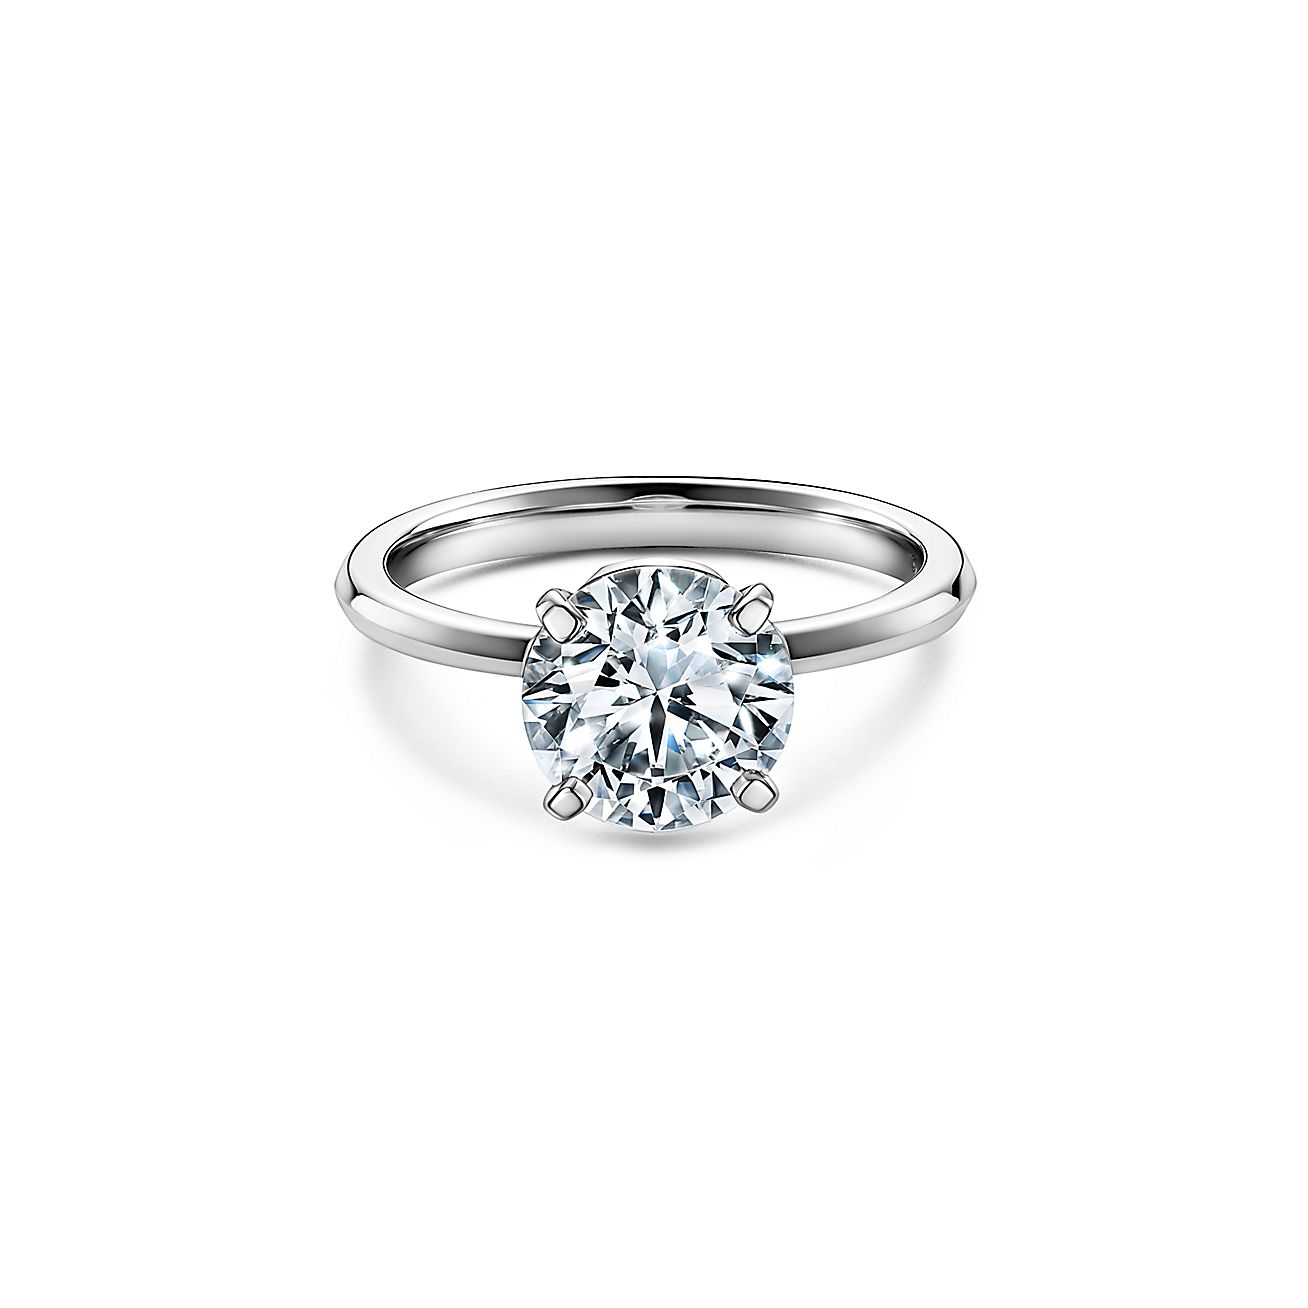 Tiffany True® Engagement Ring With A Round Brilliant Diamond